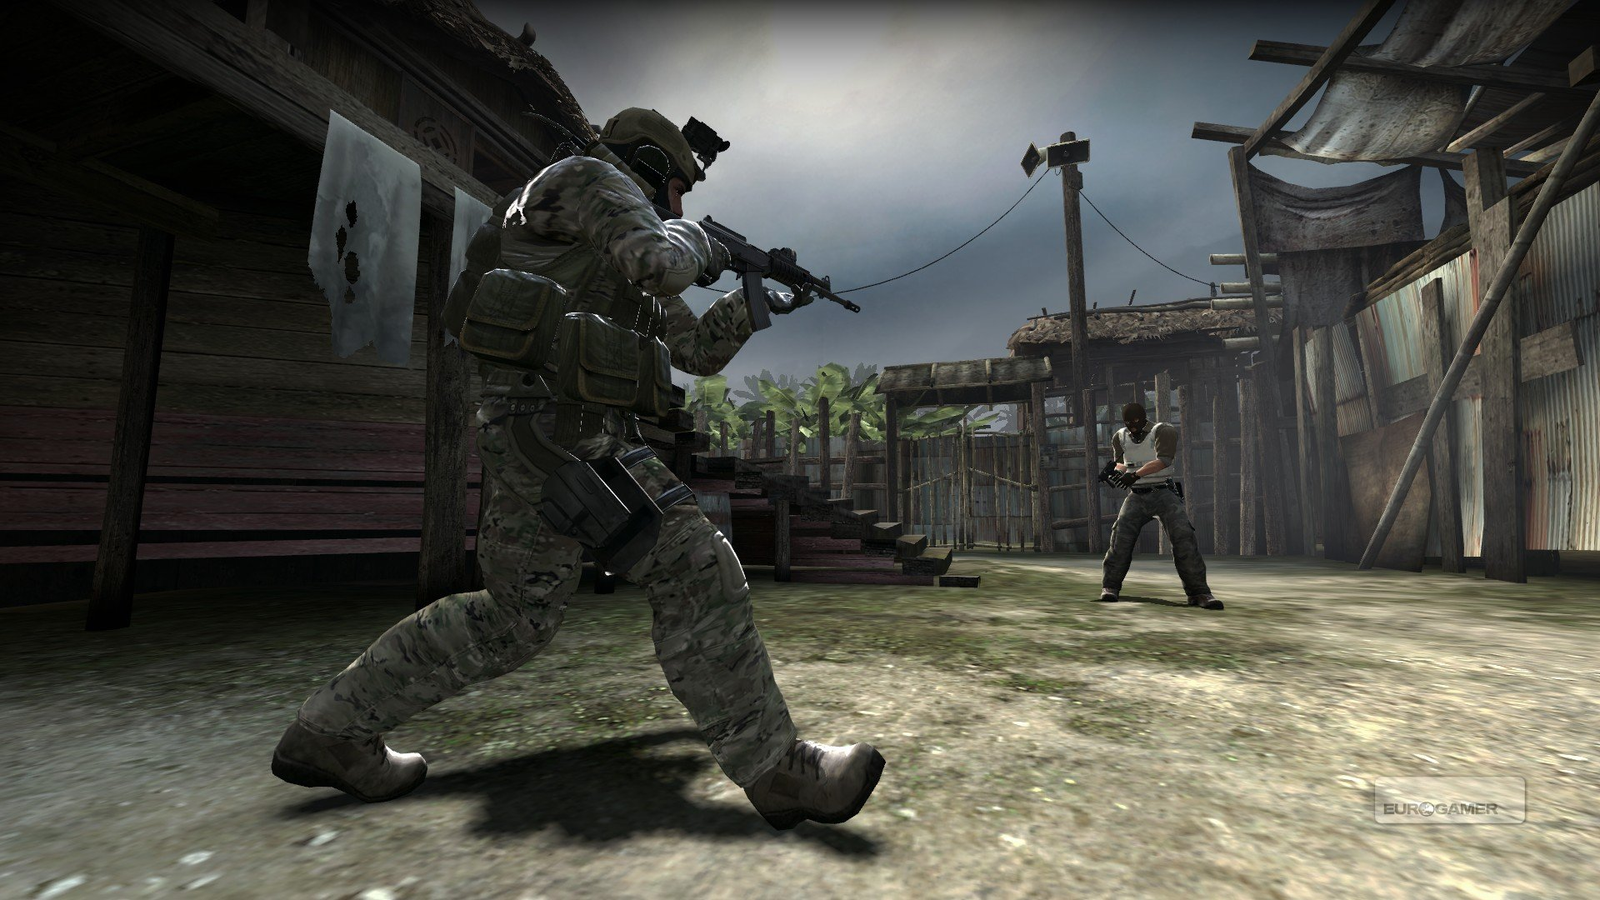 Valve May Have Just Hinted at a Release Date for Counter-Strike 2